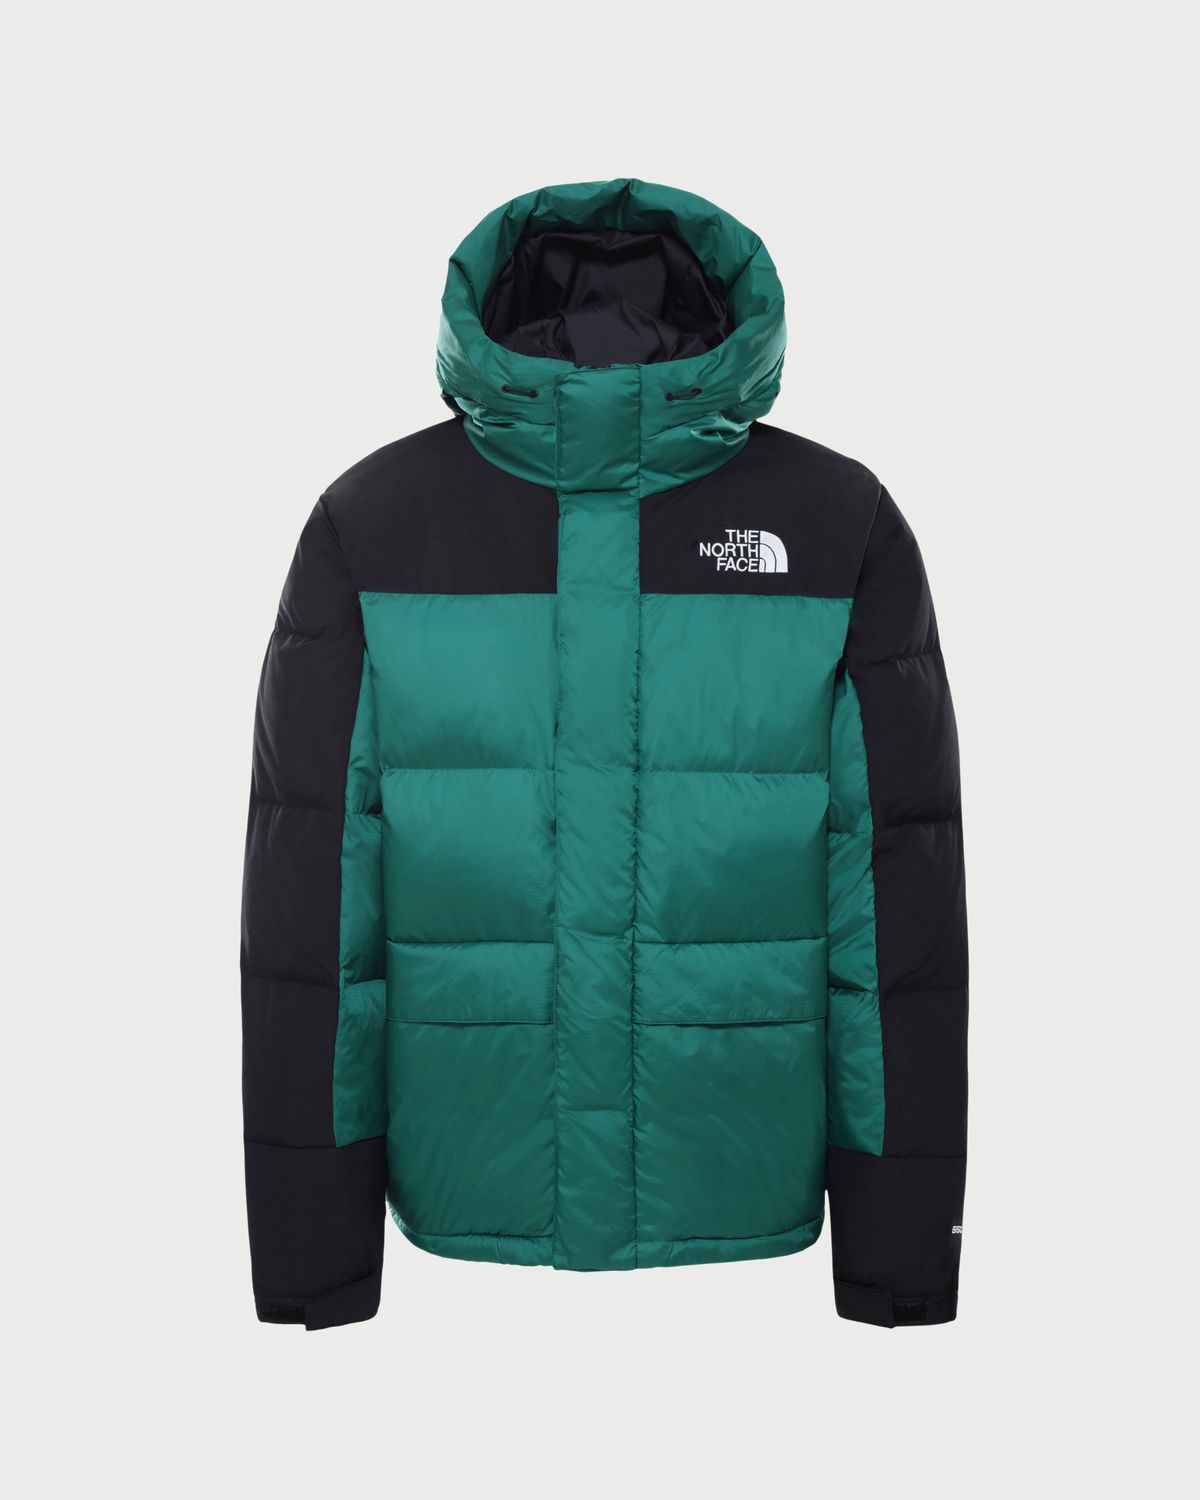 The North Face – Himalayan Down Jacket Peak Evergreen Unisex - Outerwear - Green - Image 1